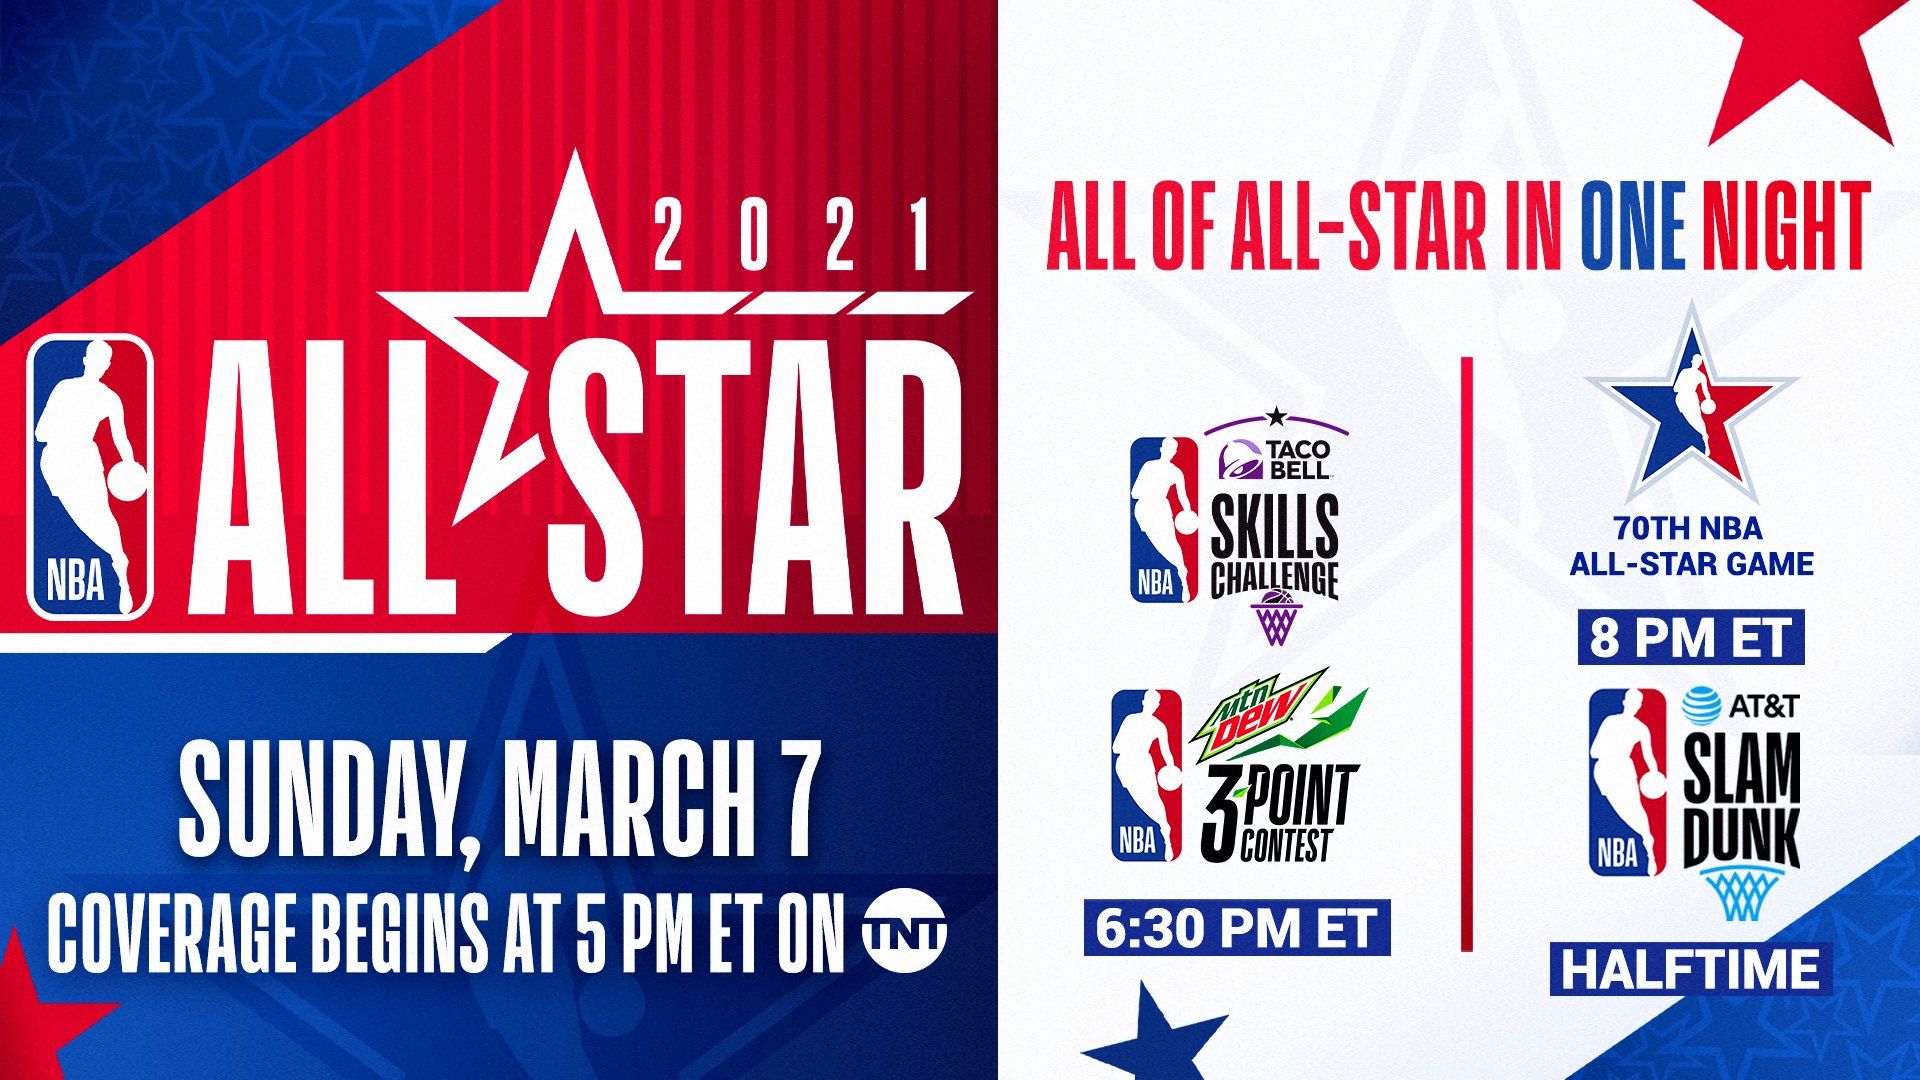 NBA All Star 2021 To Feature The Game And Skills Competitions On One Night For The First Time On March 7. The NBA And NBPA Are Committing More Than $2.5M